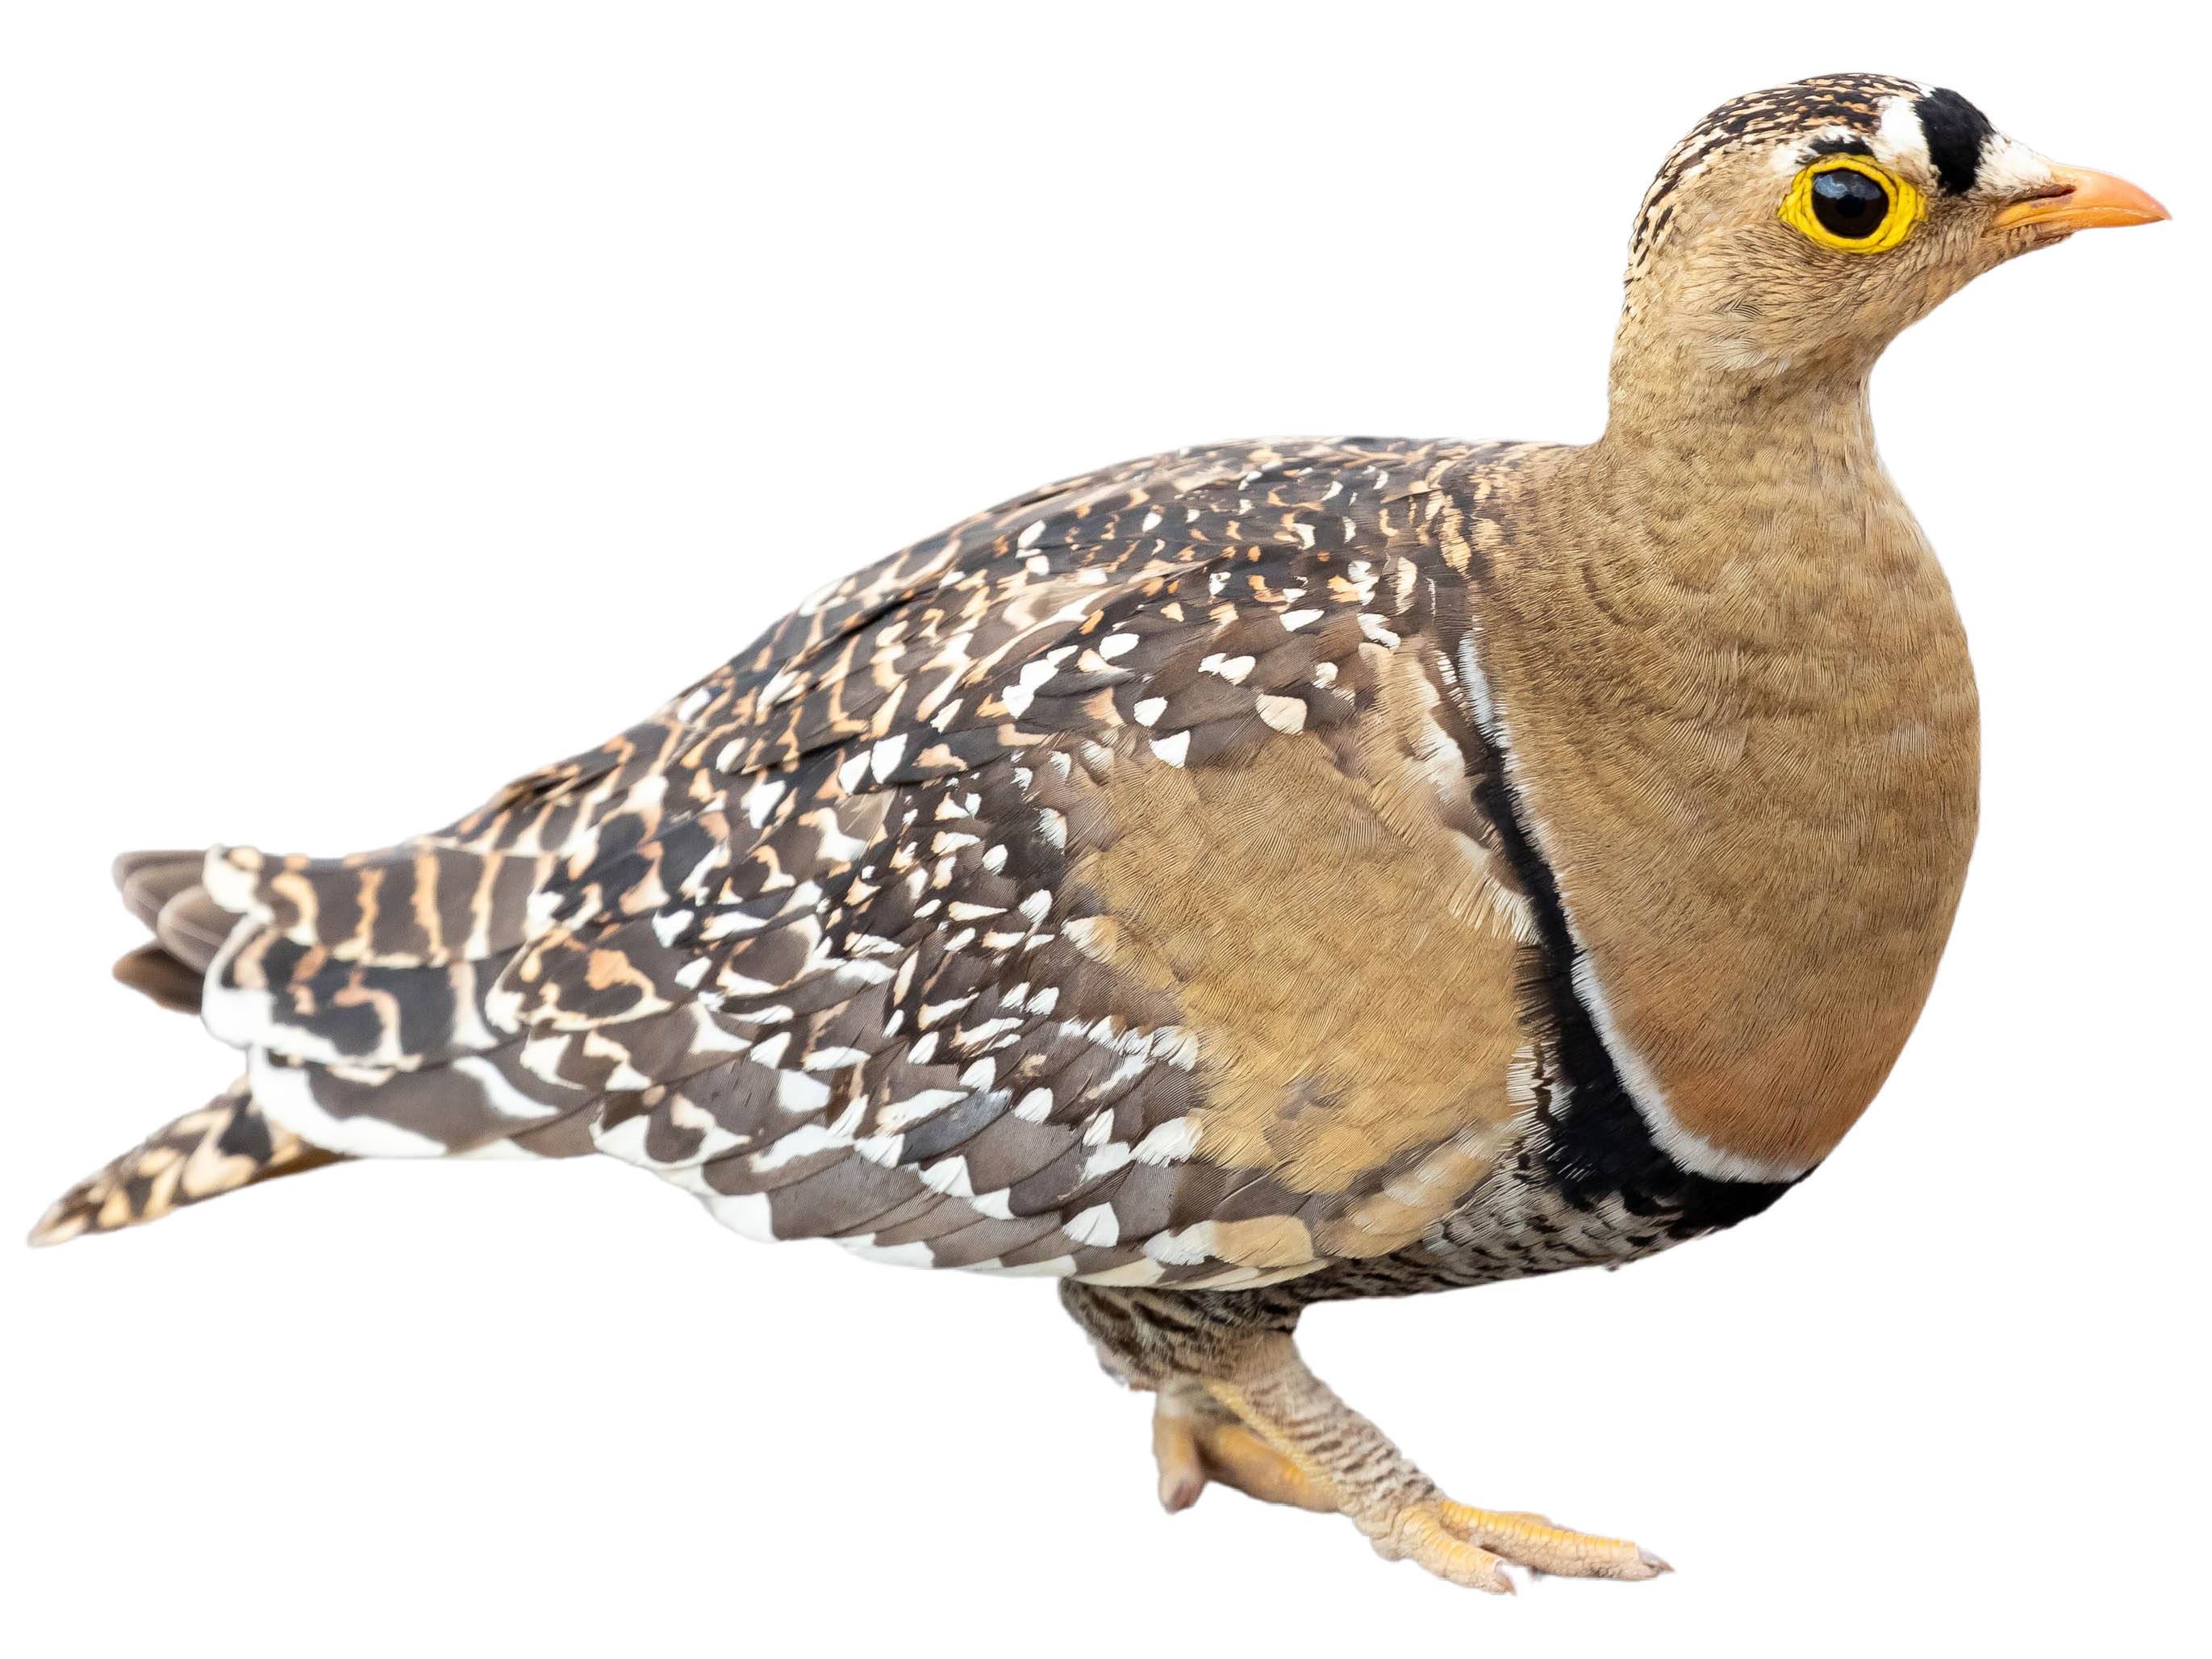 A photo of a Double-banded Sandgrouse (Pterocles bicinctus), male